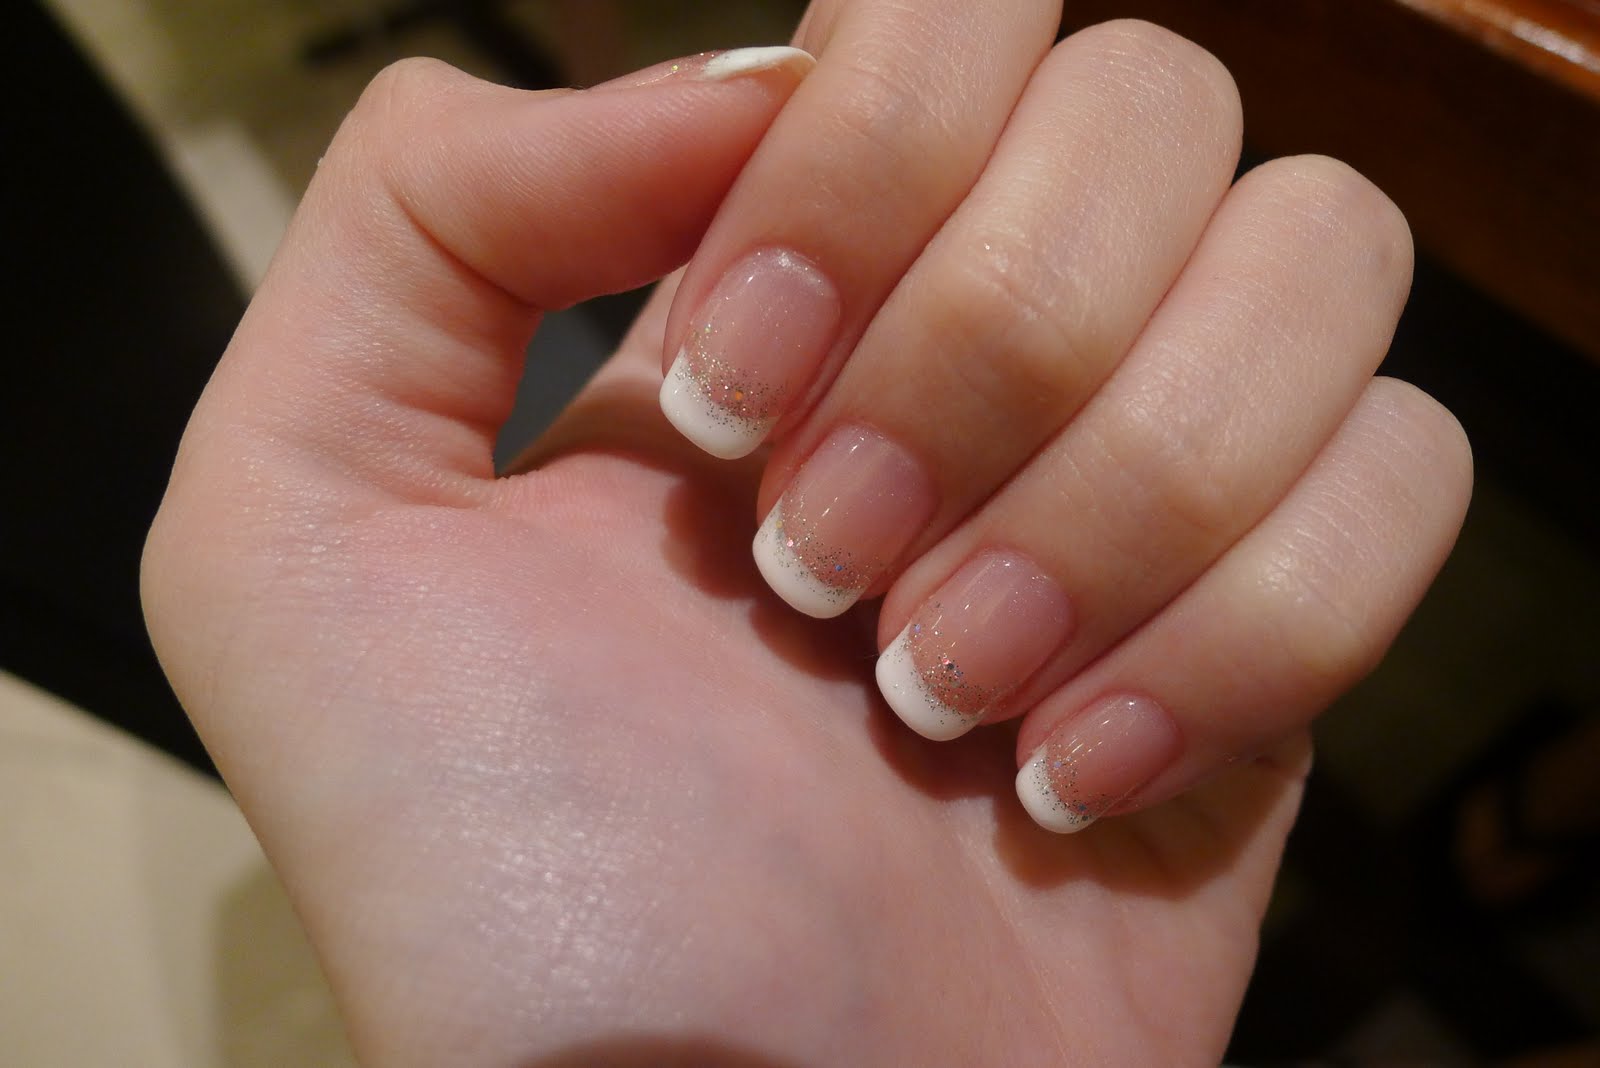 Natural French Nail Designs - wide 4